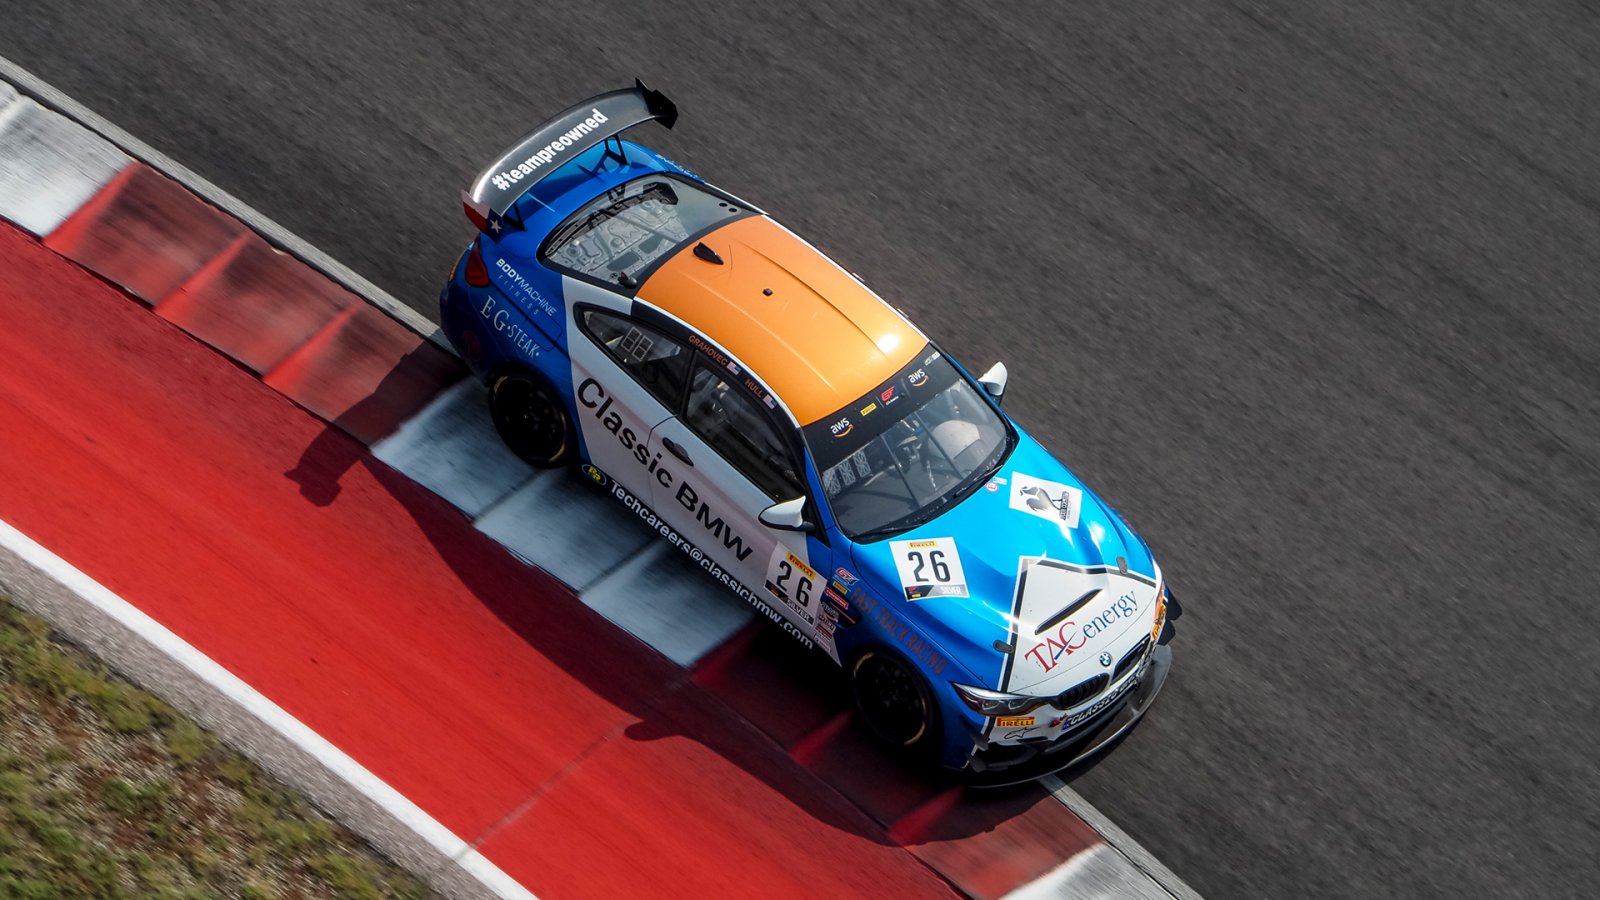 Chandler Hull, Toby Grahovec Record 2 Top-5 Finishes at COTA With TACenergy /Classic BMW M4 GT4 in GT4 SprintX Action